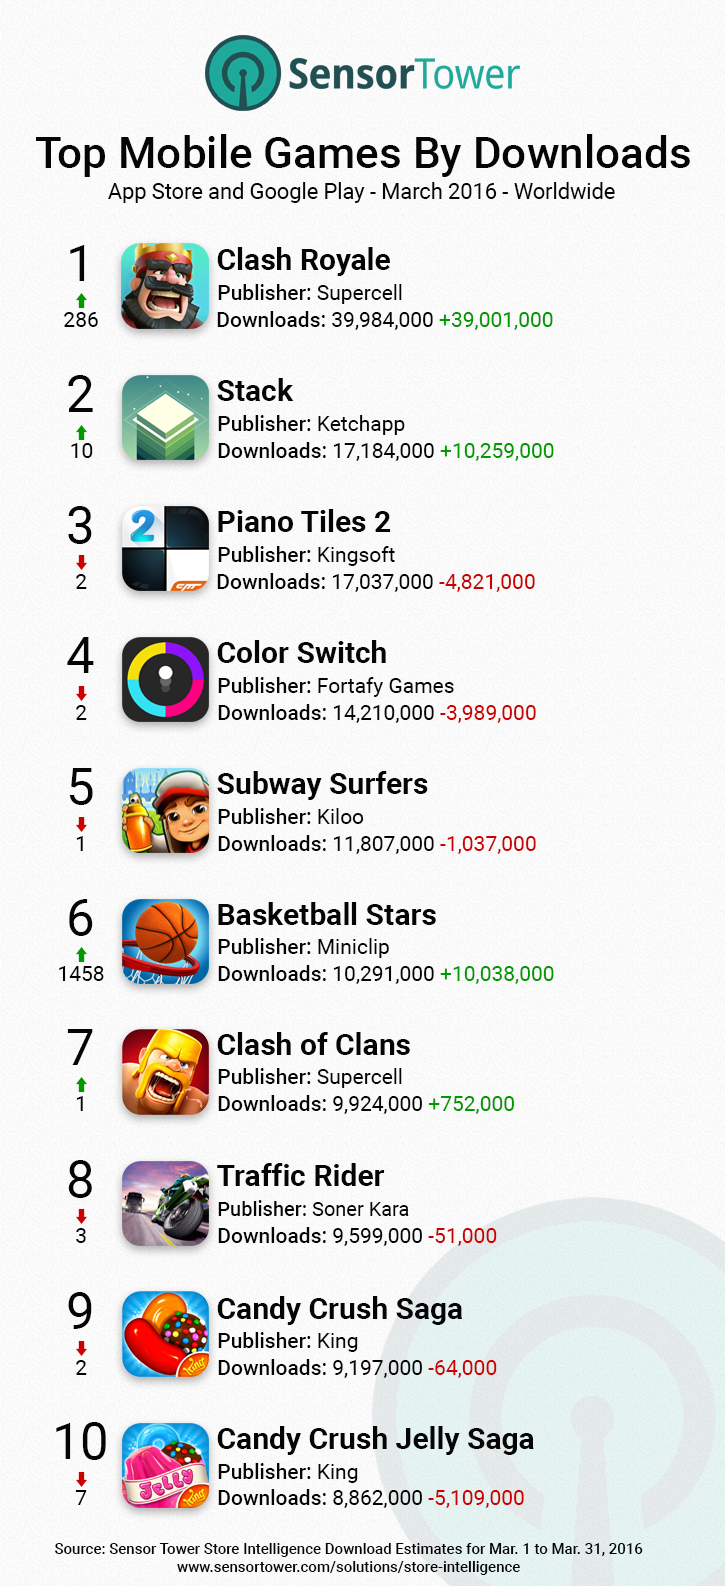 Mobile Games Top Downloads Worldwide March 2016